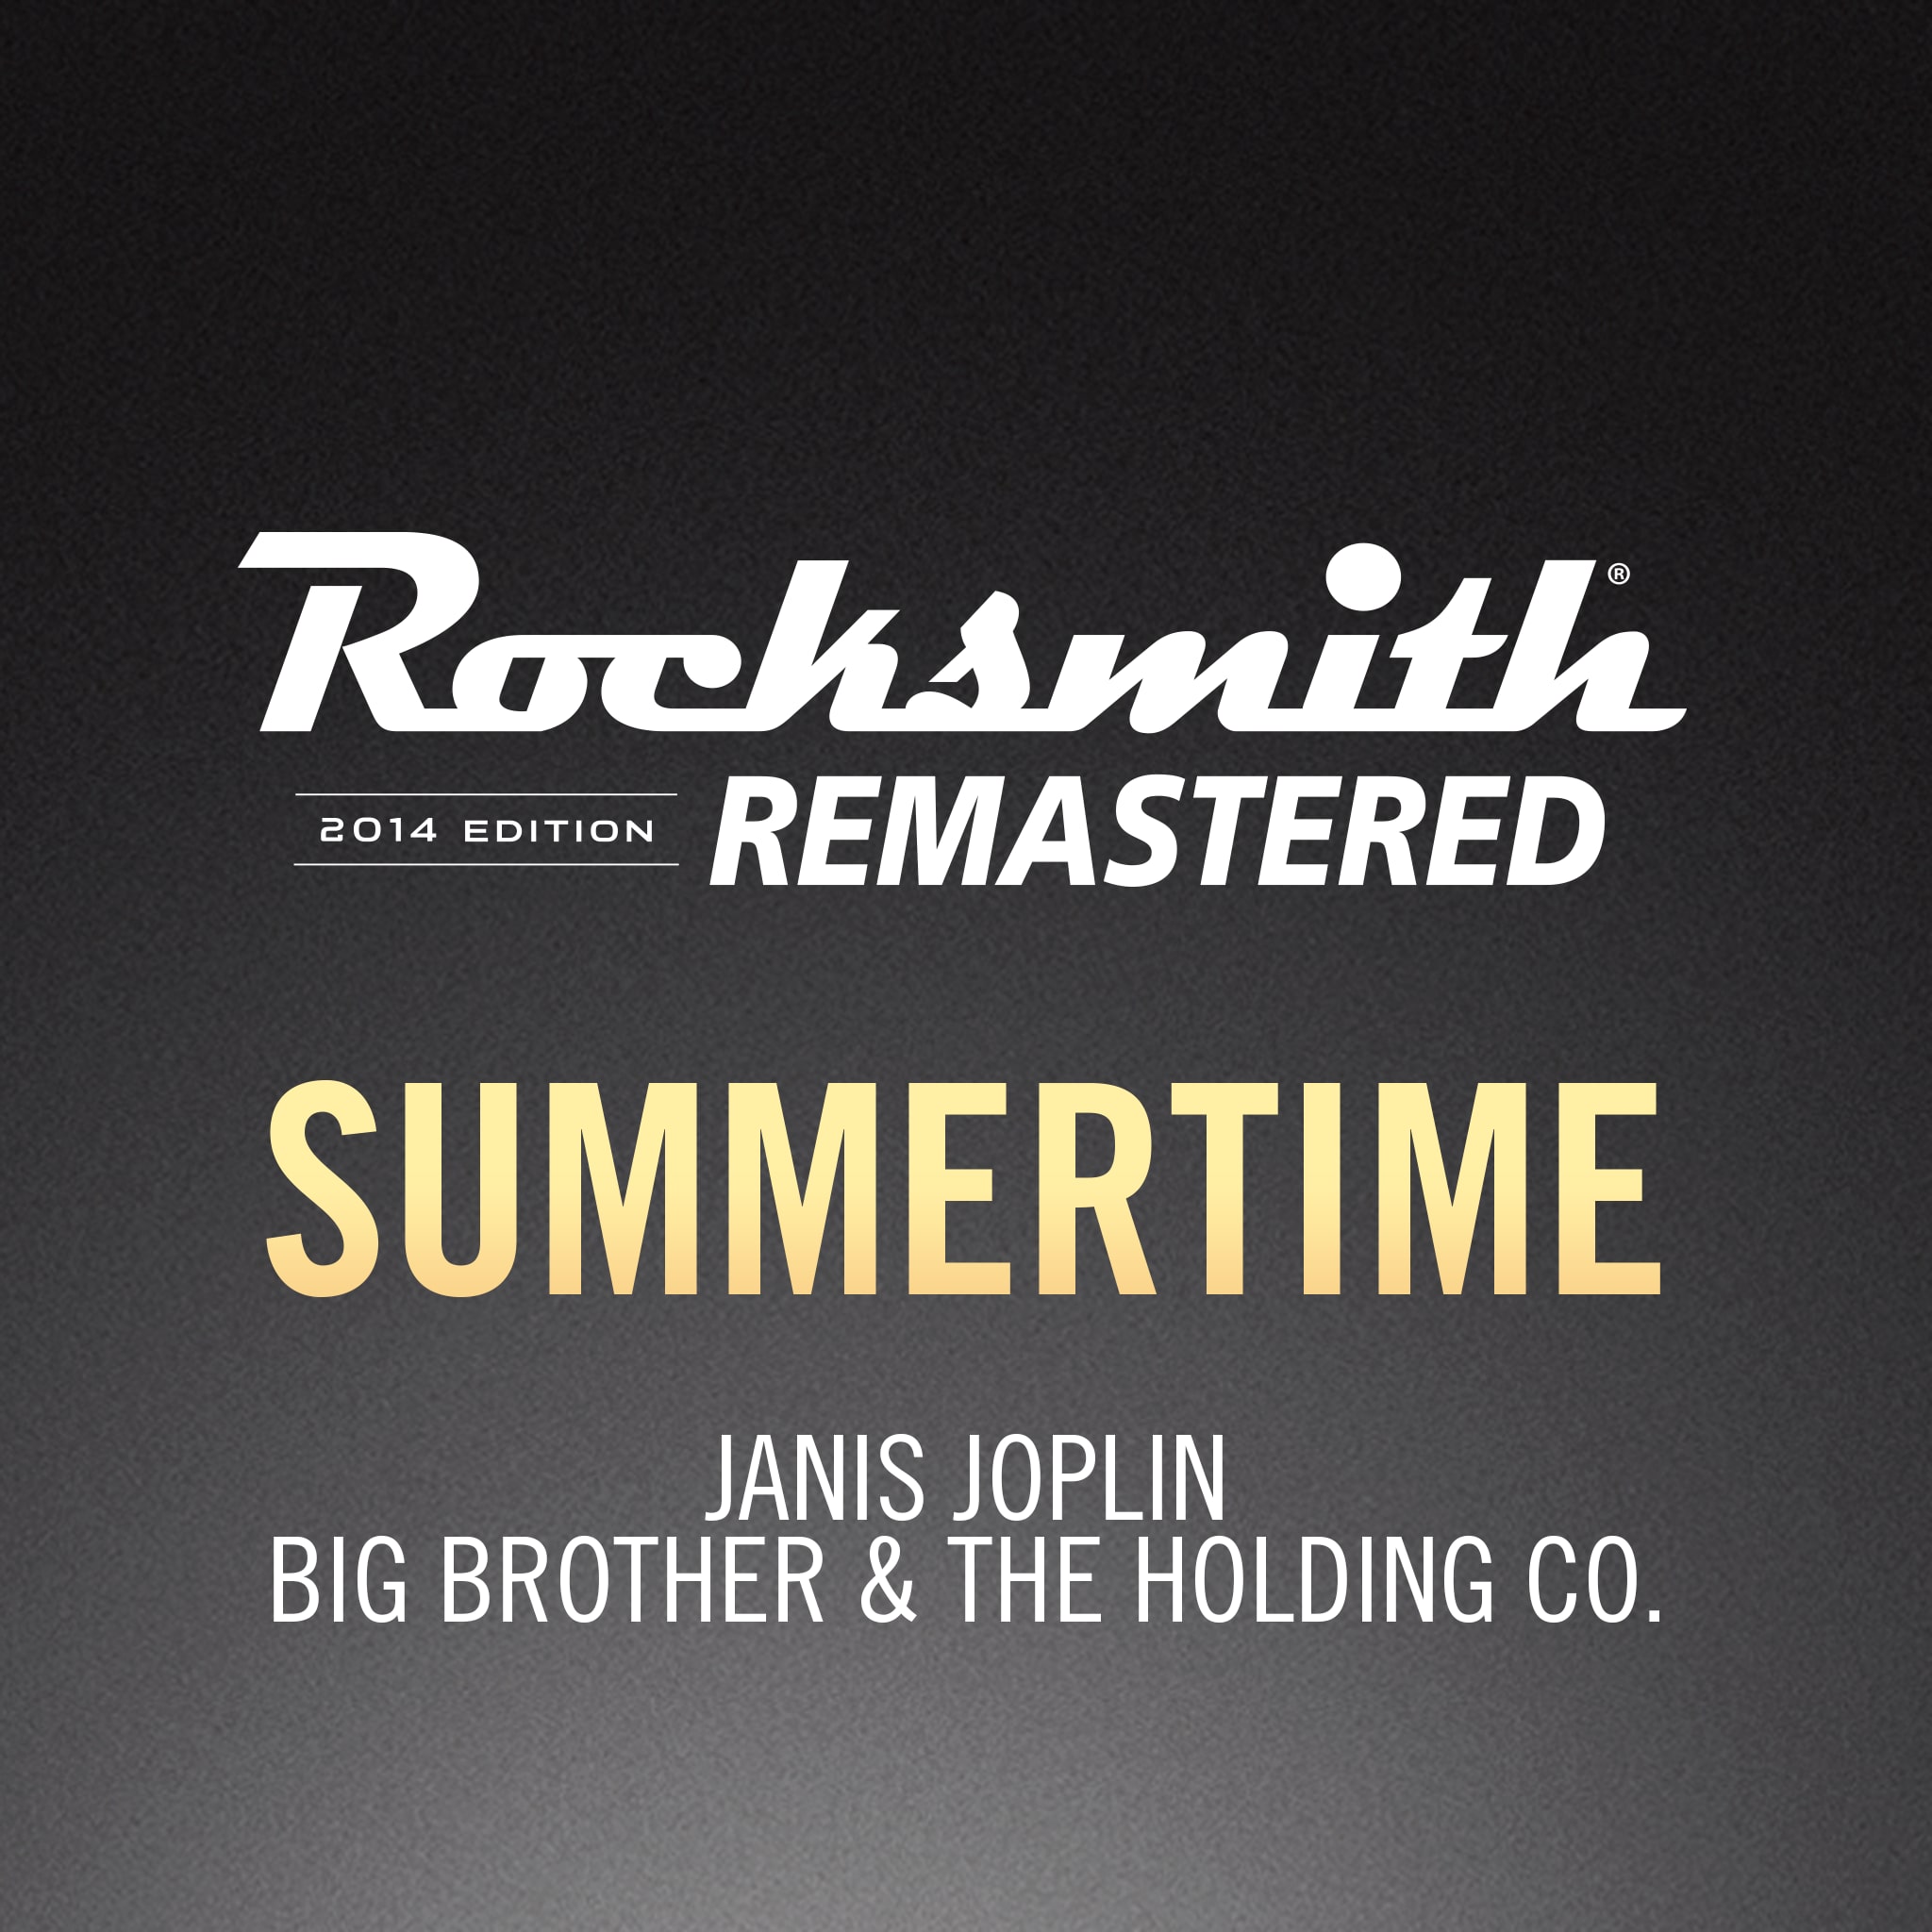 Summertime - Janis Joplin/Big Brother & The Holding Co